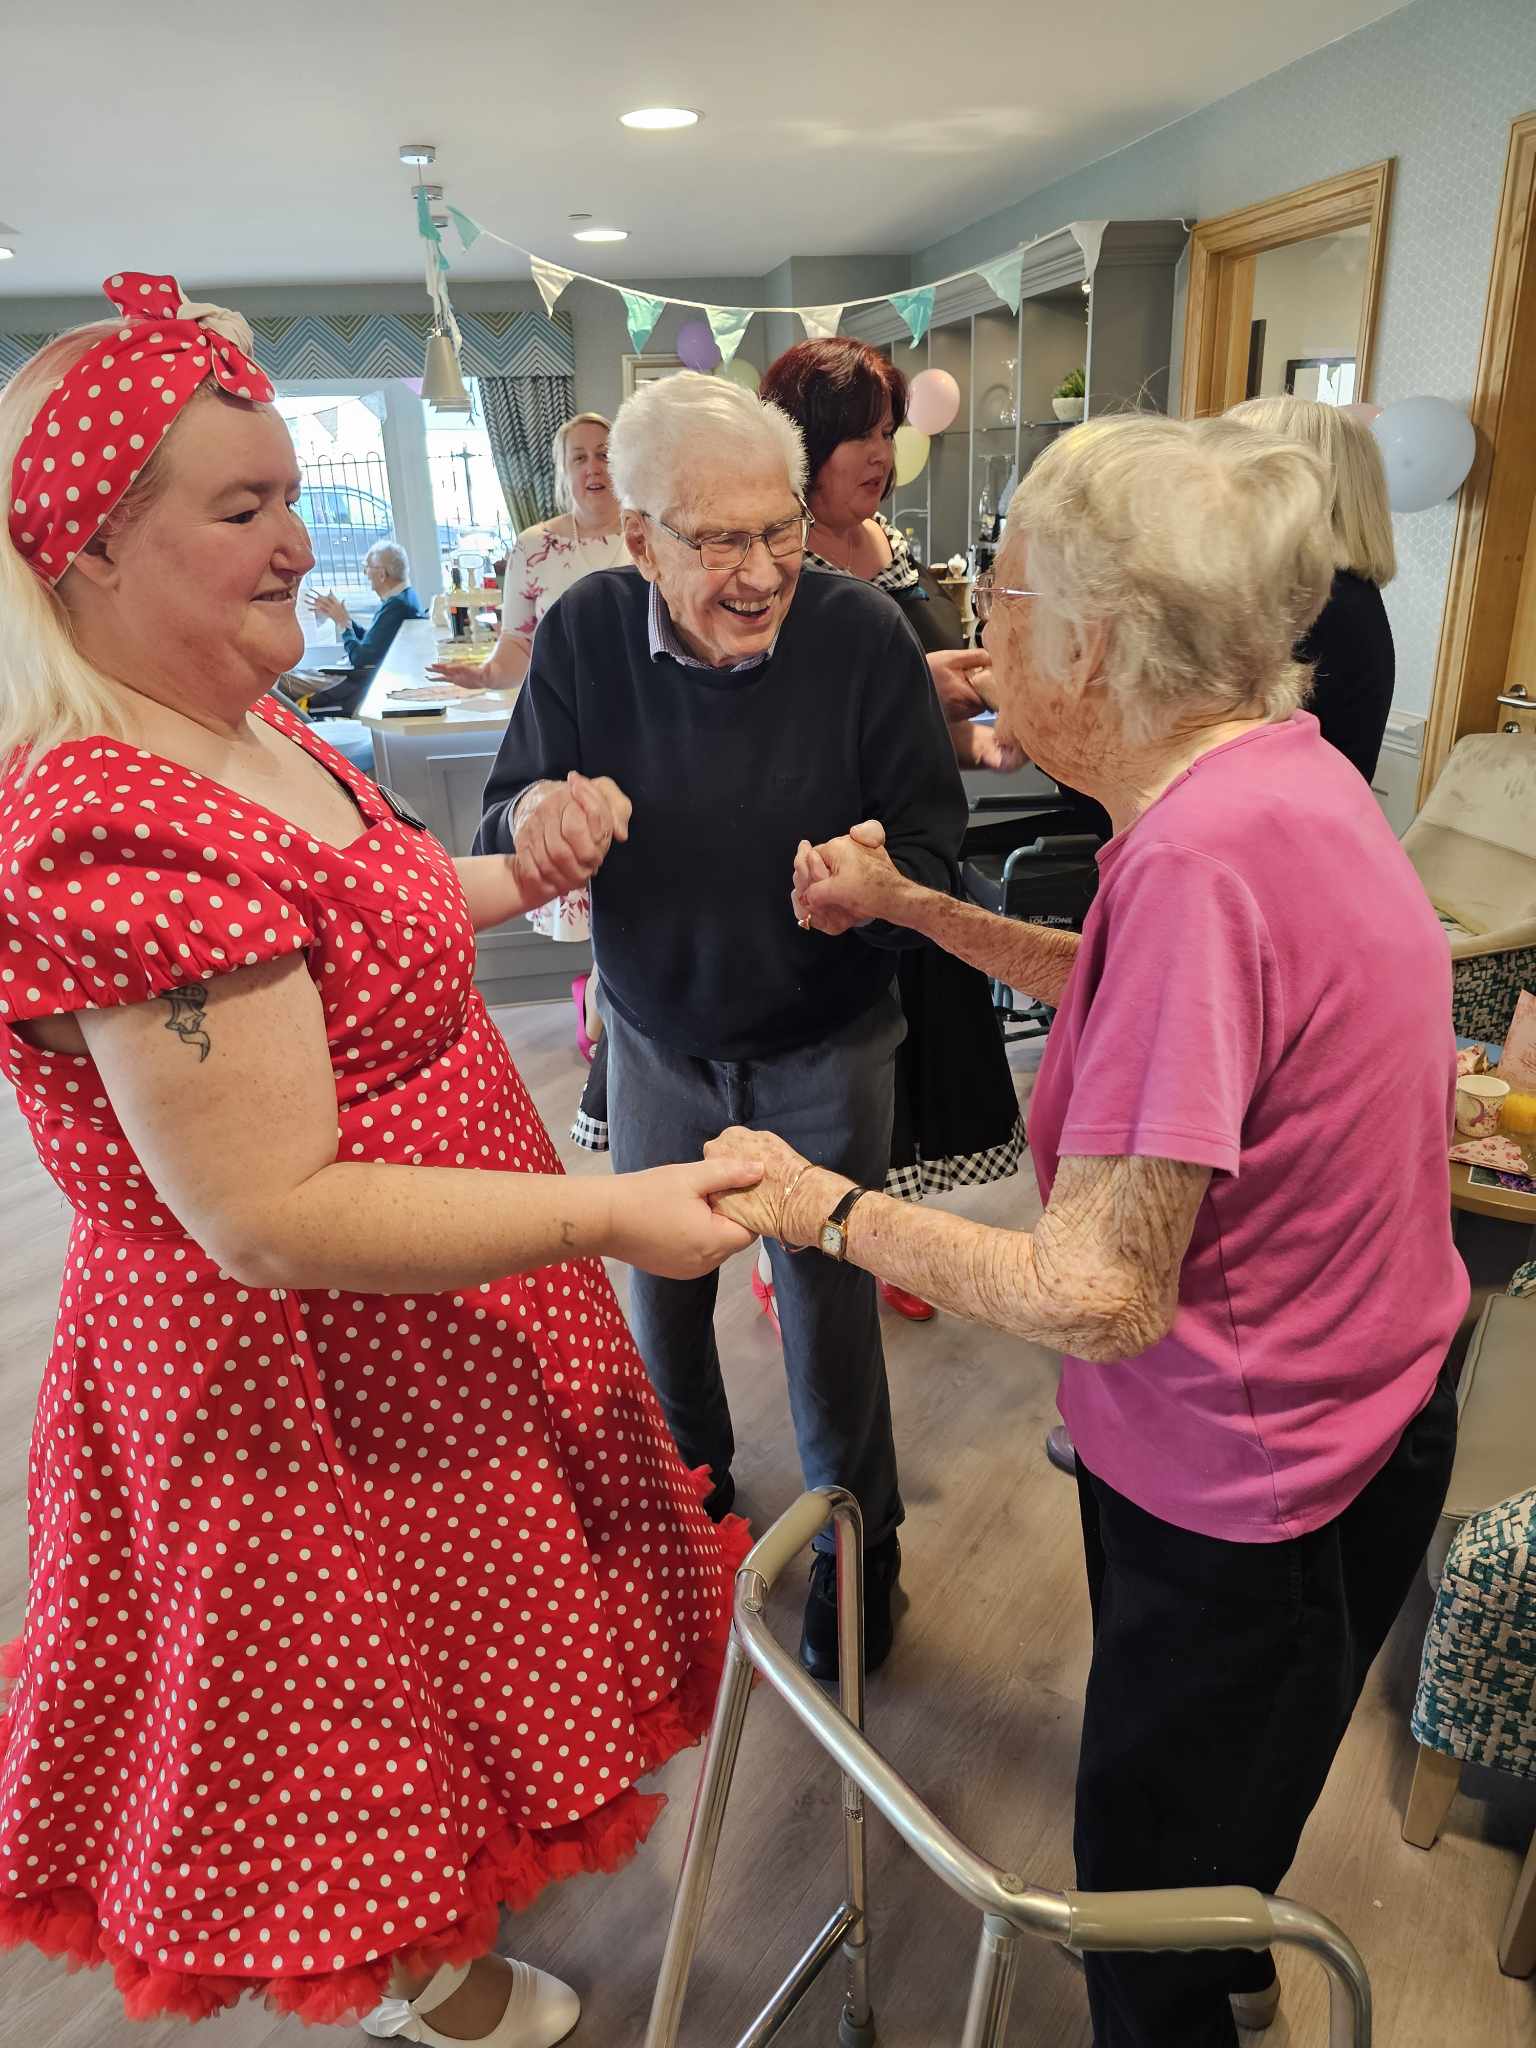 A female dress in a 50's style red dress dancing holding hands with a male and female residents.